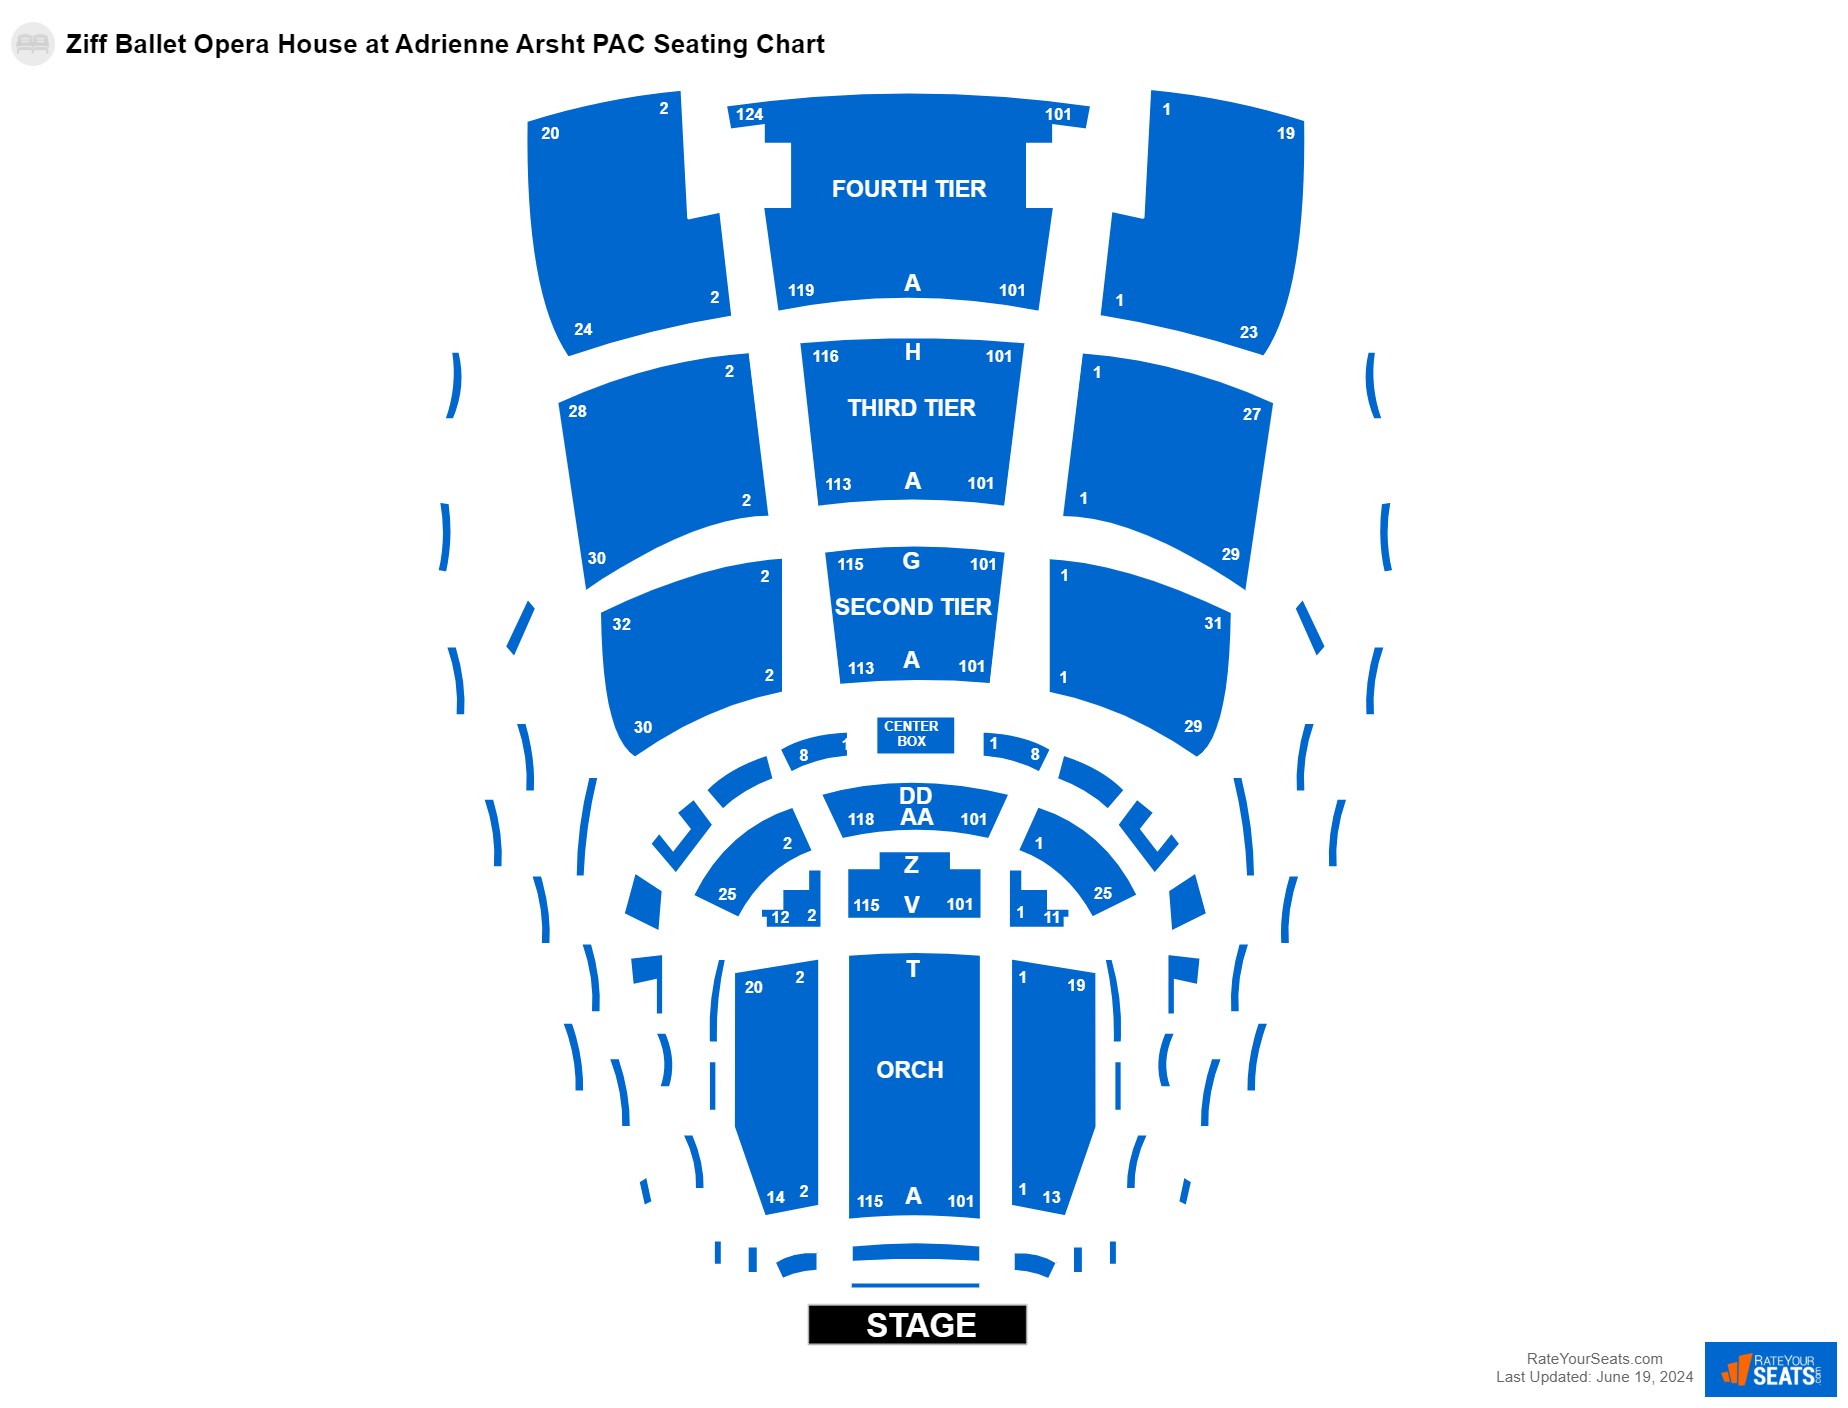 Family seating chart at Ziff Ballet Opera House at Adrienne Arsht PAC